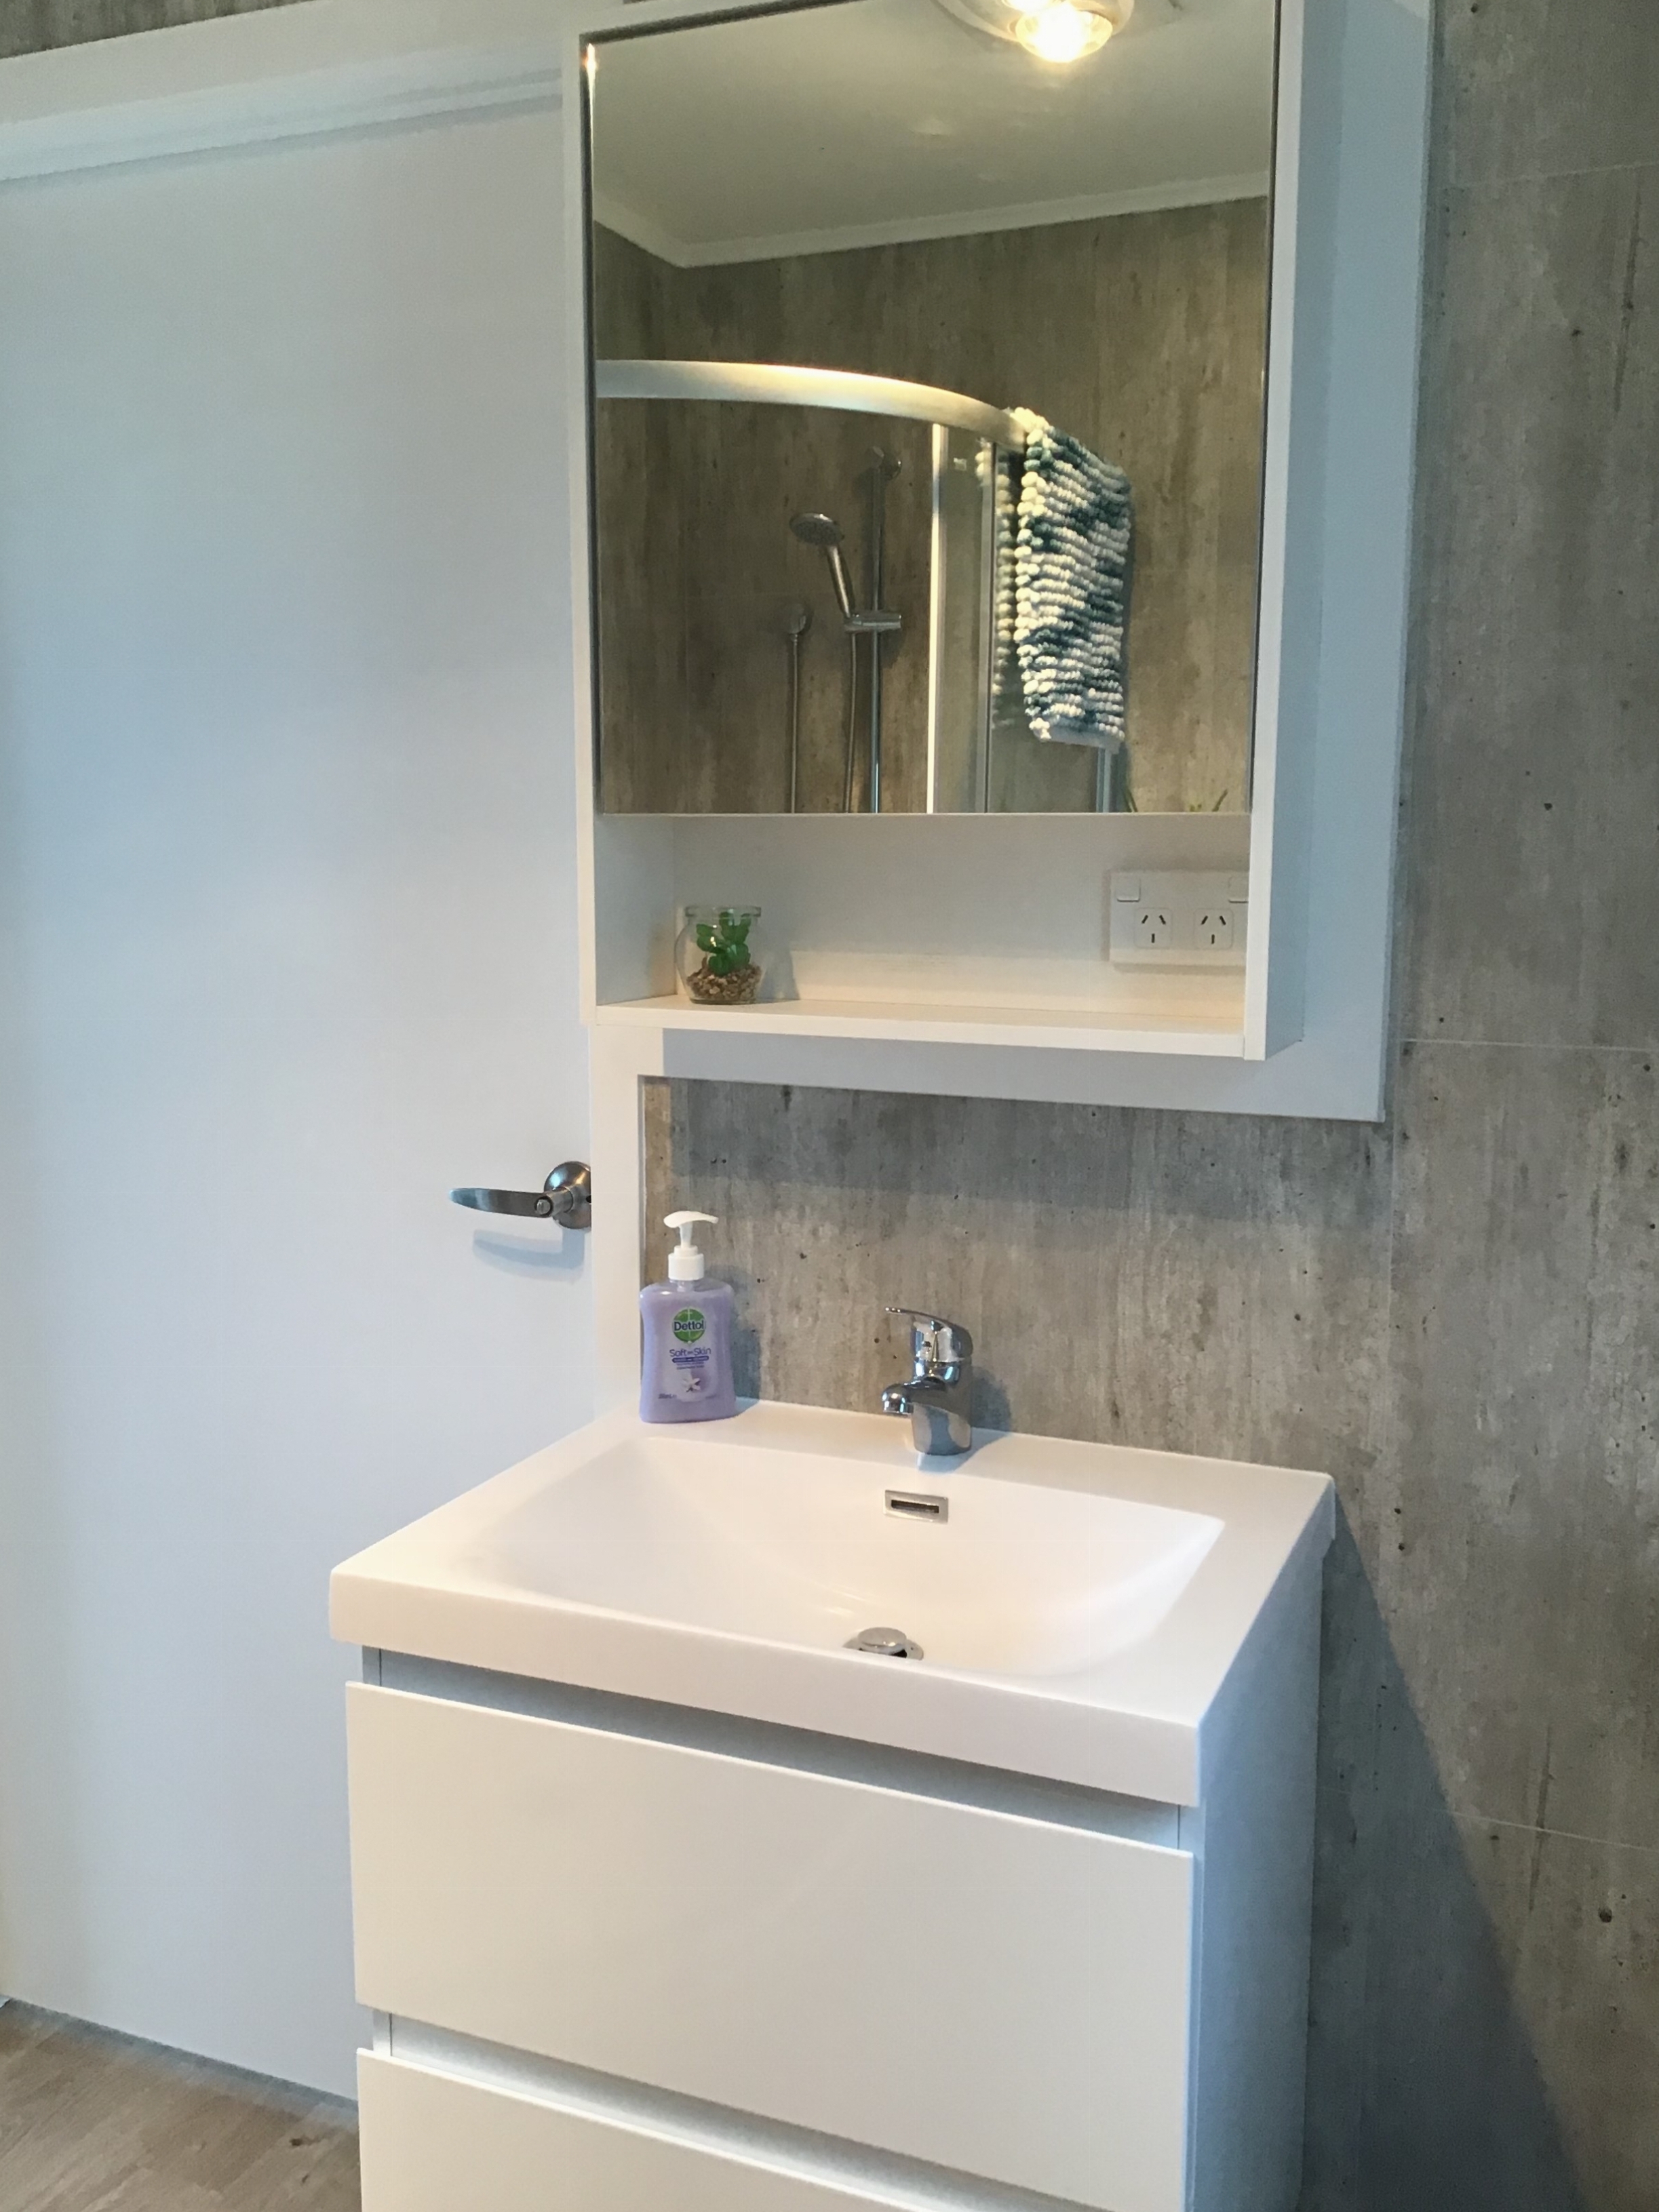 Vanity with mirror cabinet for additional storage